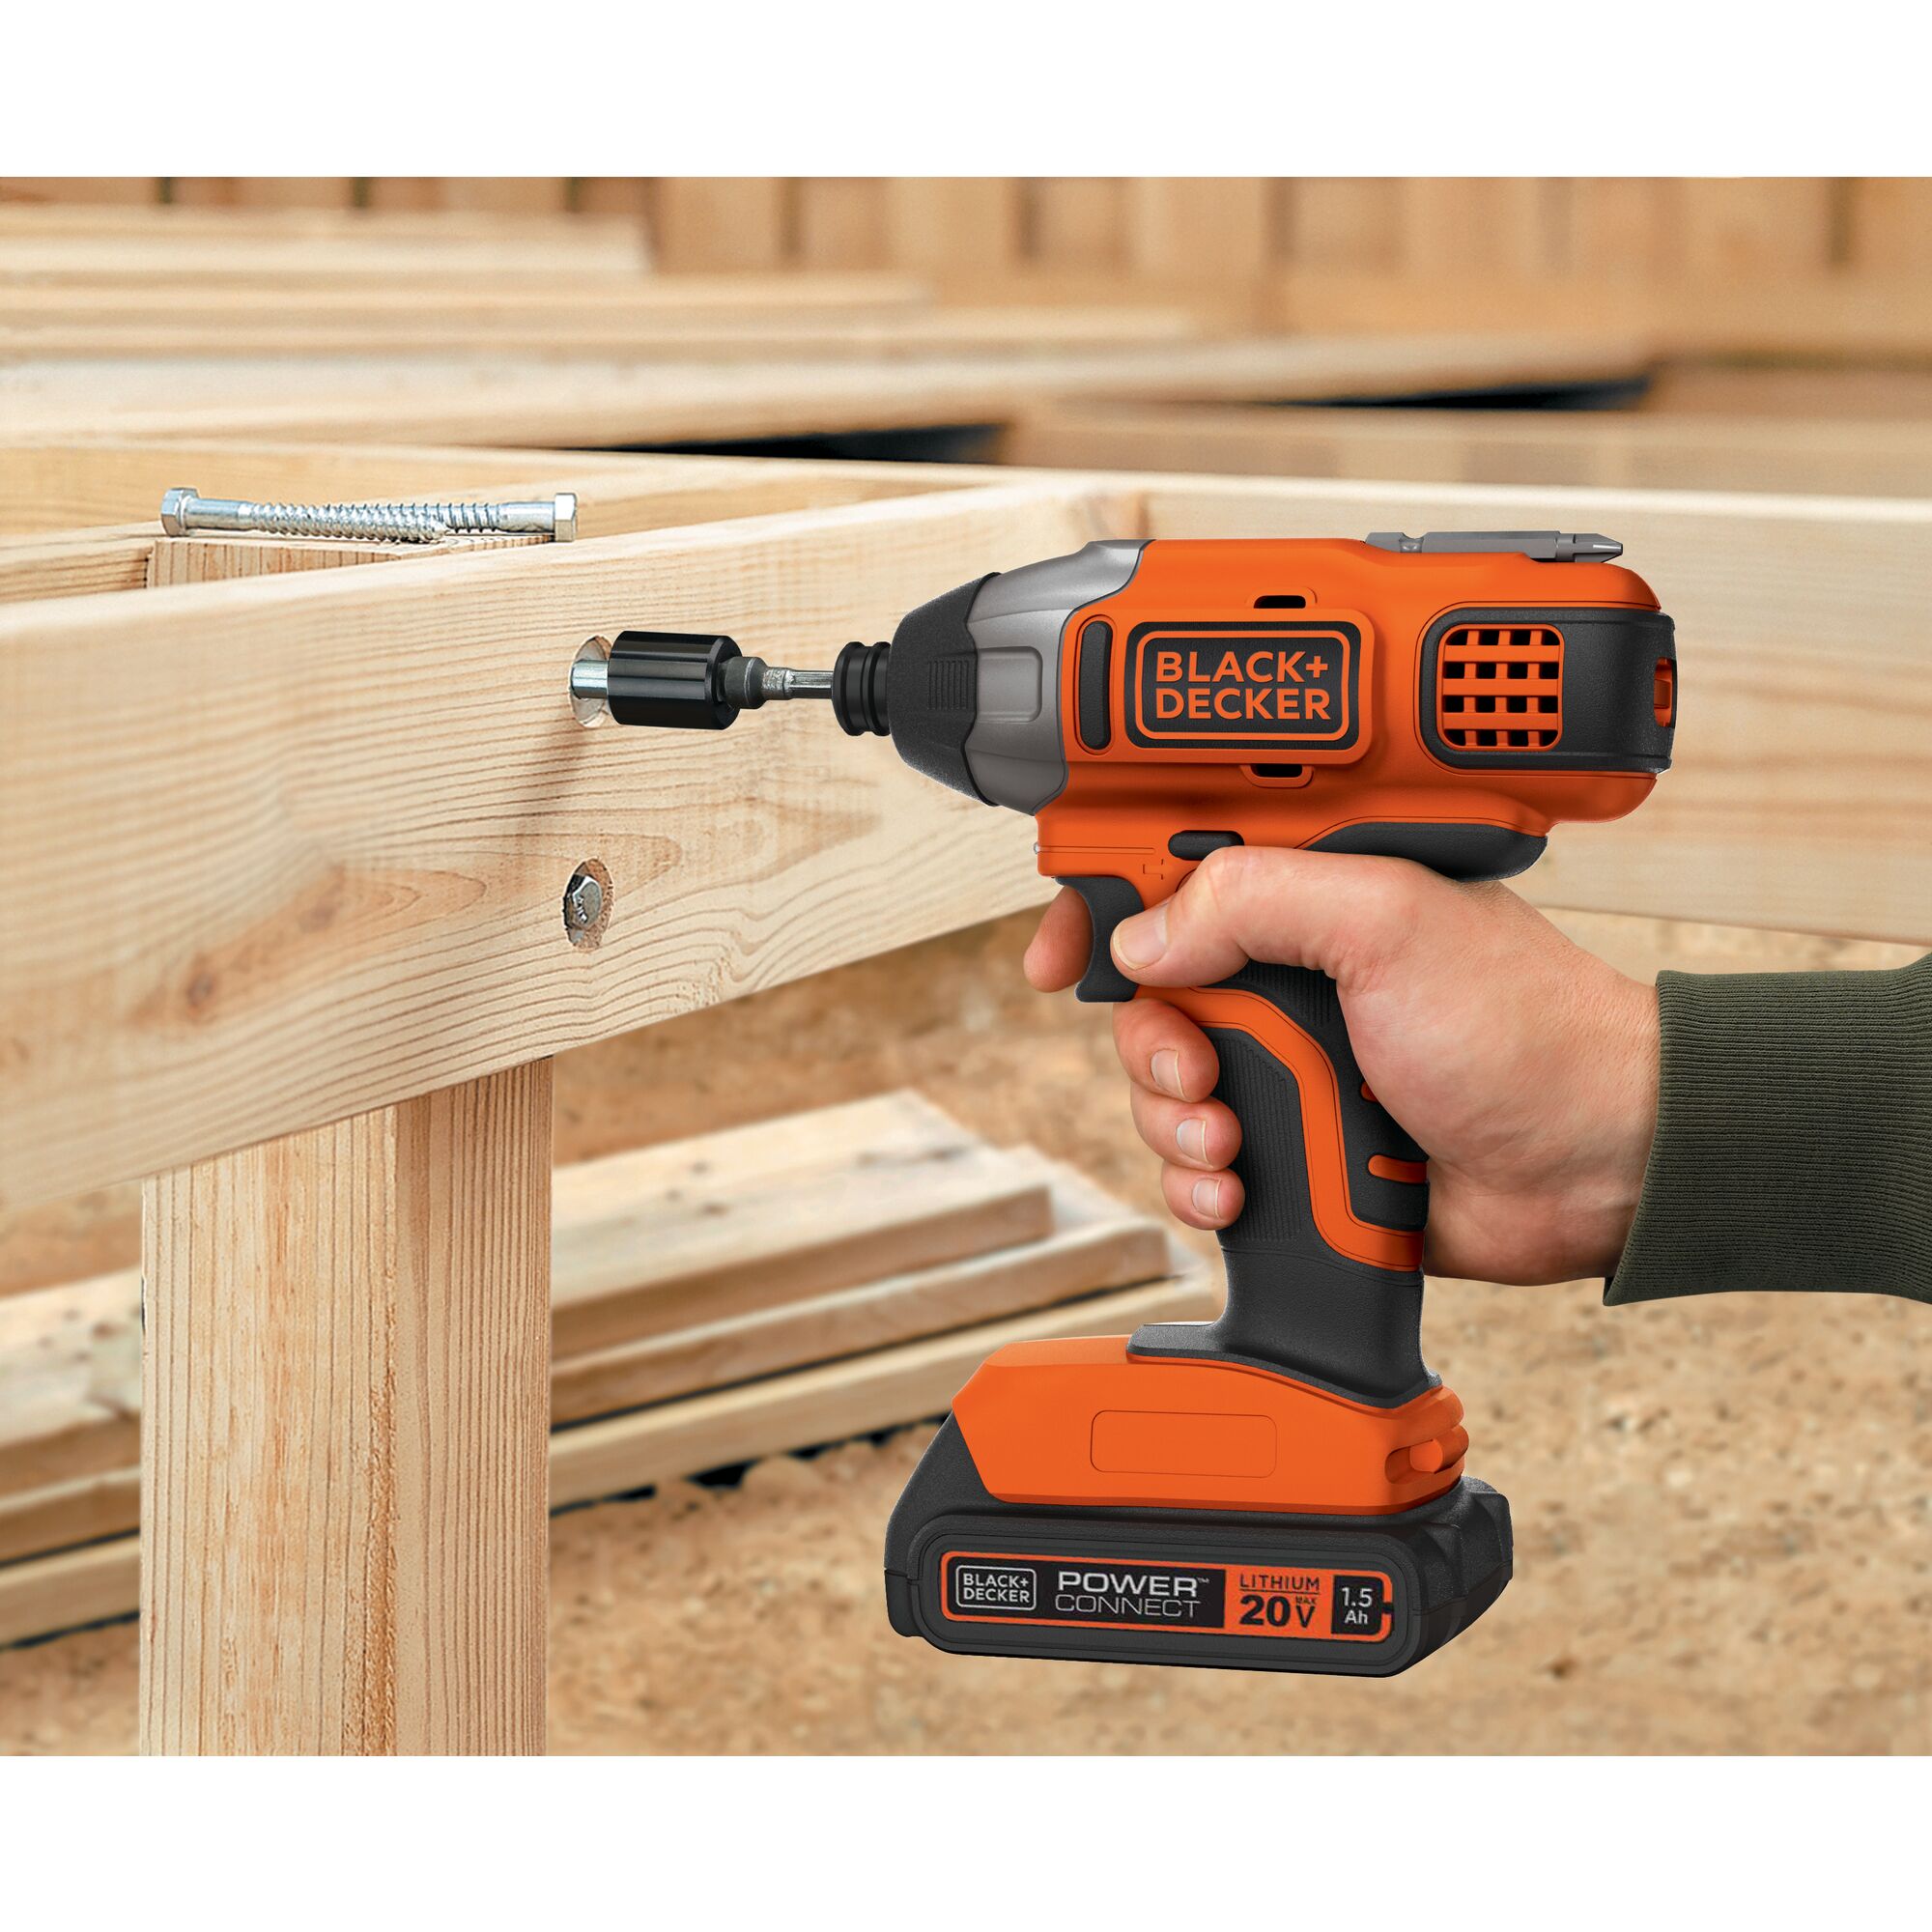 Lithium Impact Driver being used to driver screws into wood.